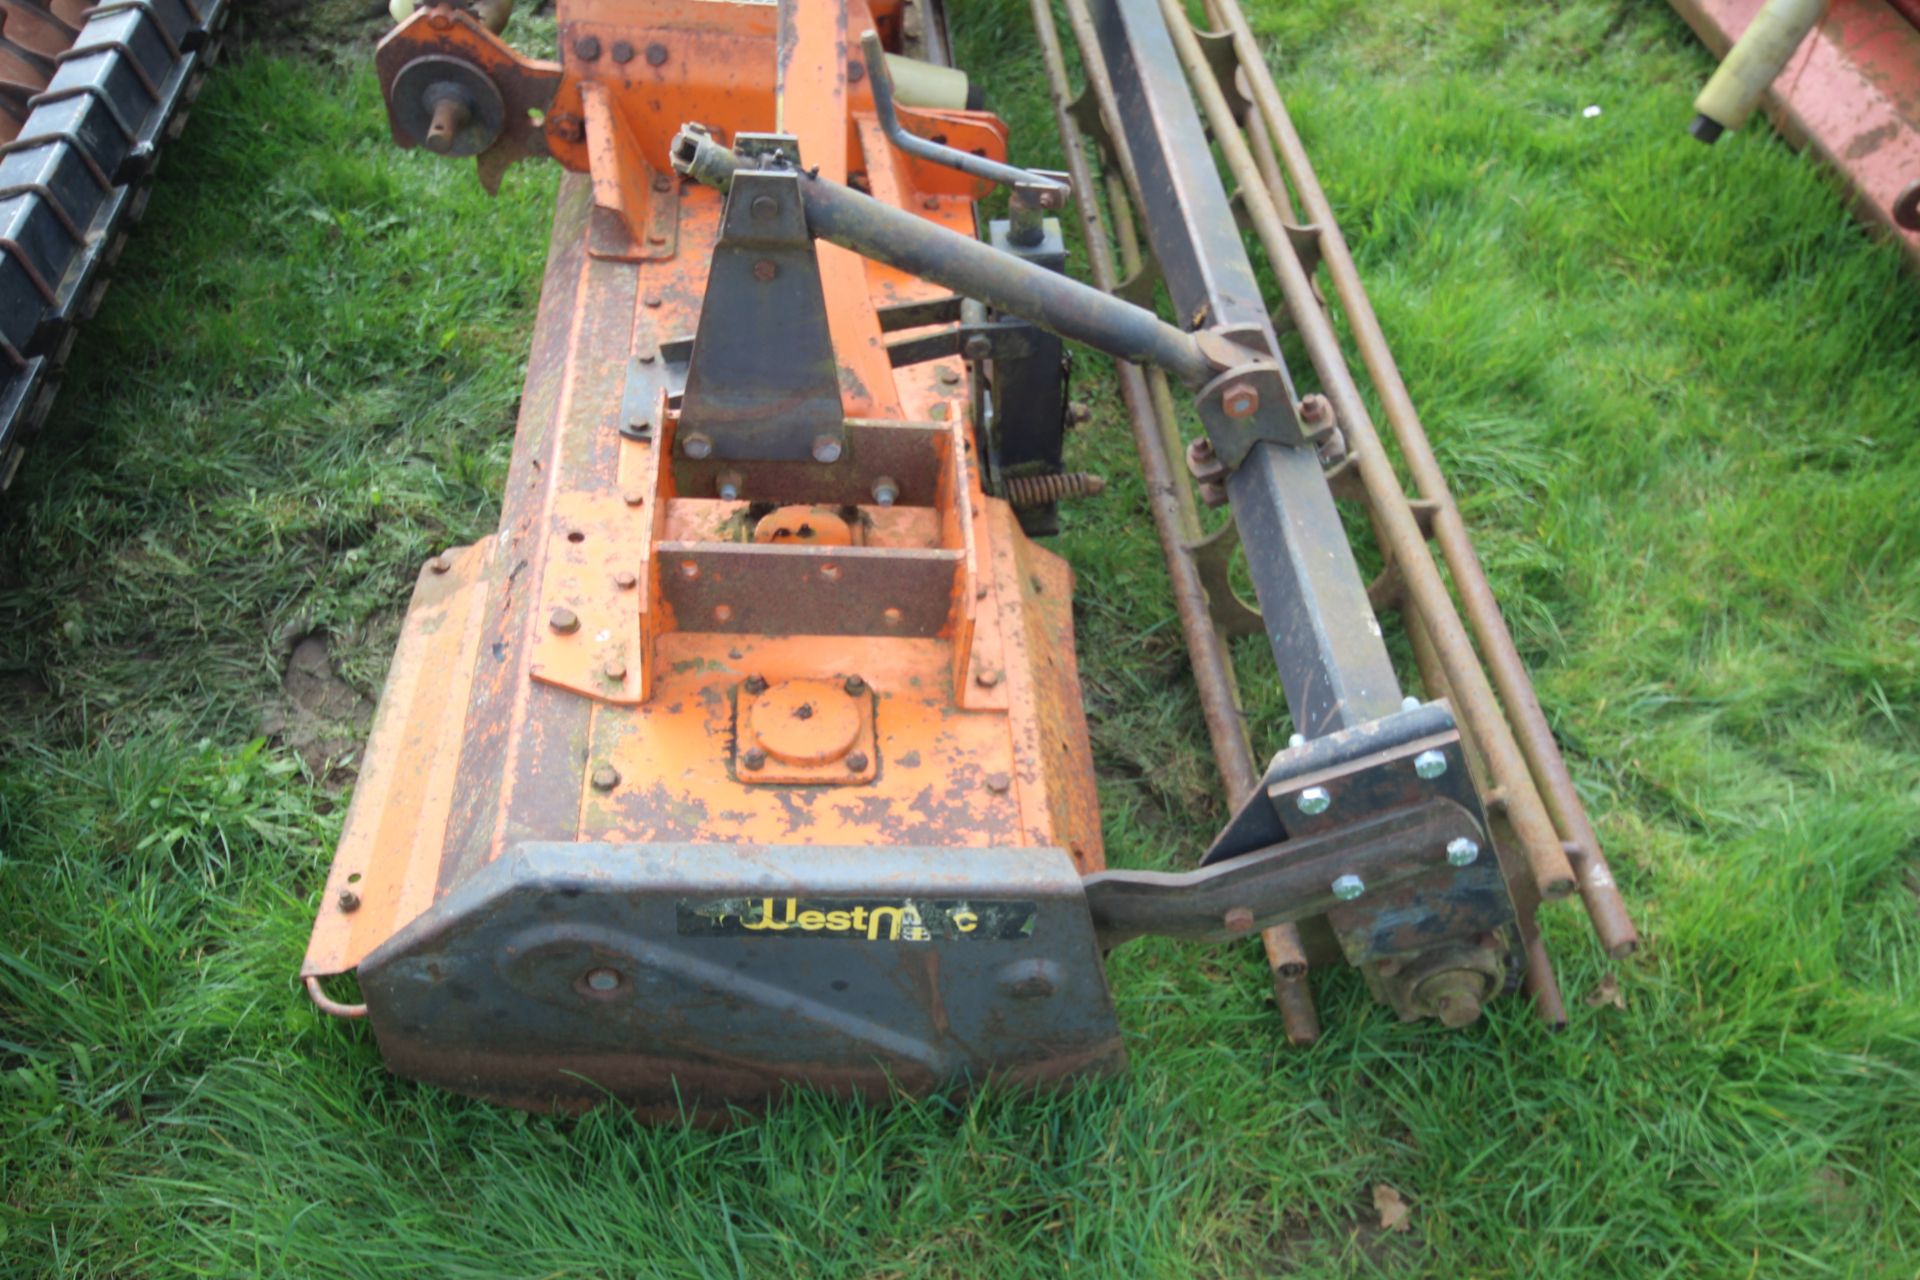 Westmac Pegararo 3m power harrow. Vendor reports owned since 2001 and used regularly. For sale due - Bild 6 aus 16